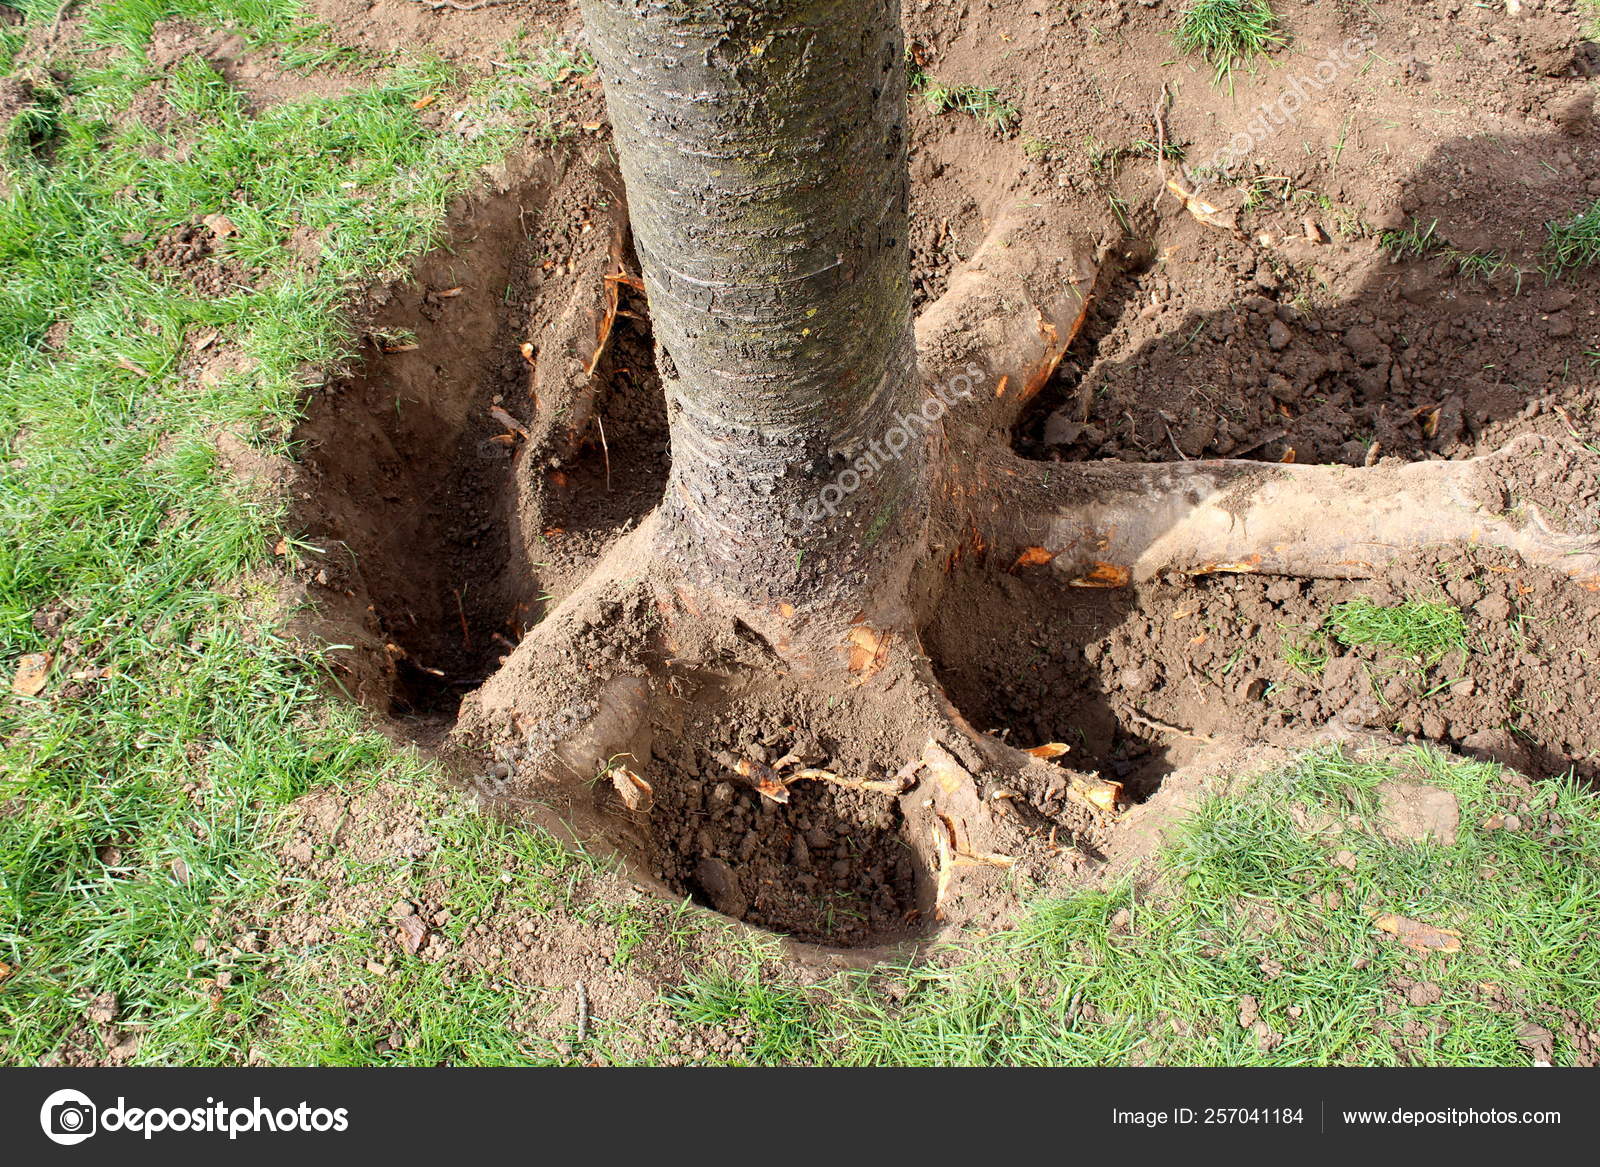 https://st4.depositphotos.com/14878114/25704/i/1600/depositphotos_257041184-stock-photo-large-tree-roots-unearthed-soil.jpg